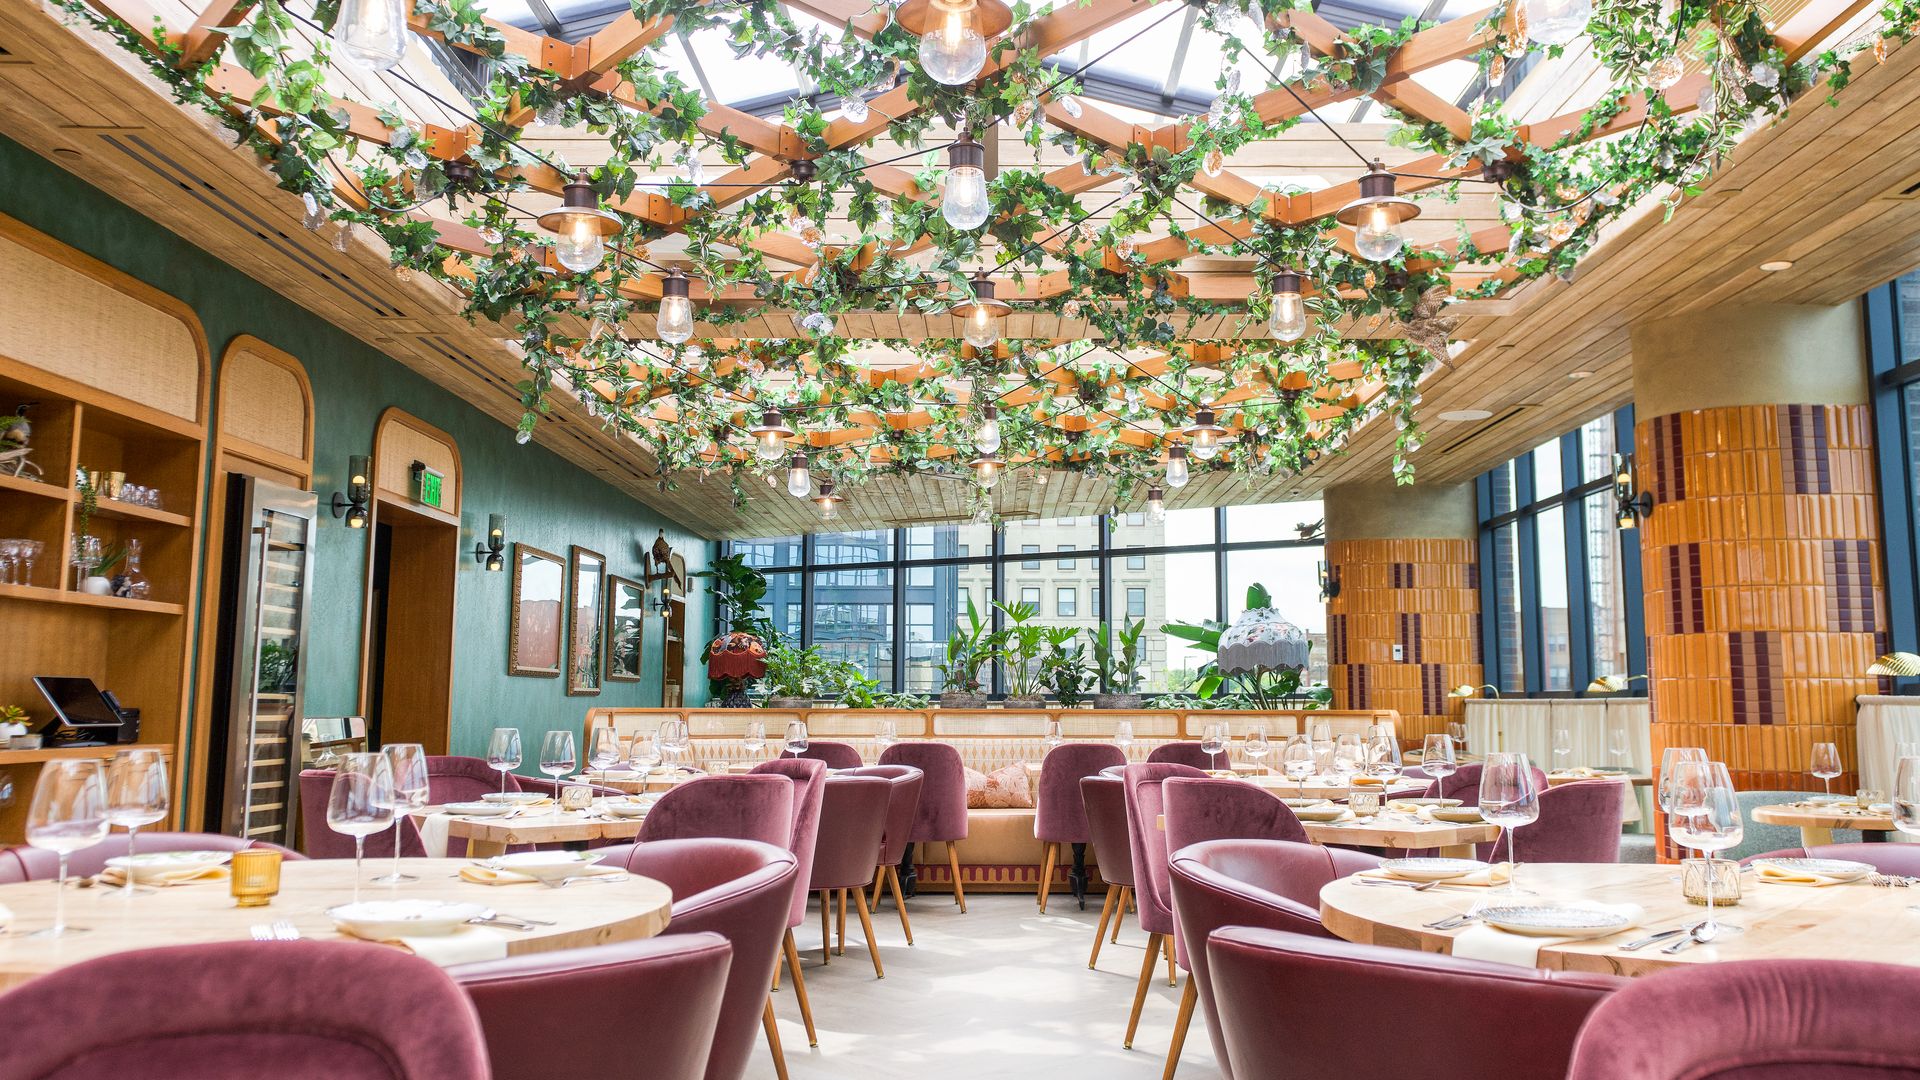 The inside of a fancy restaurant with plants on the ceiling and glass windows.